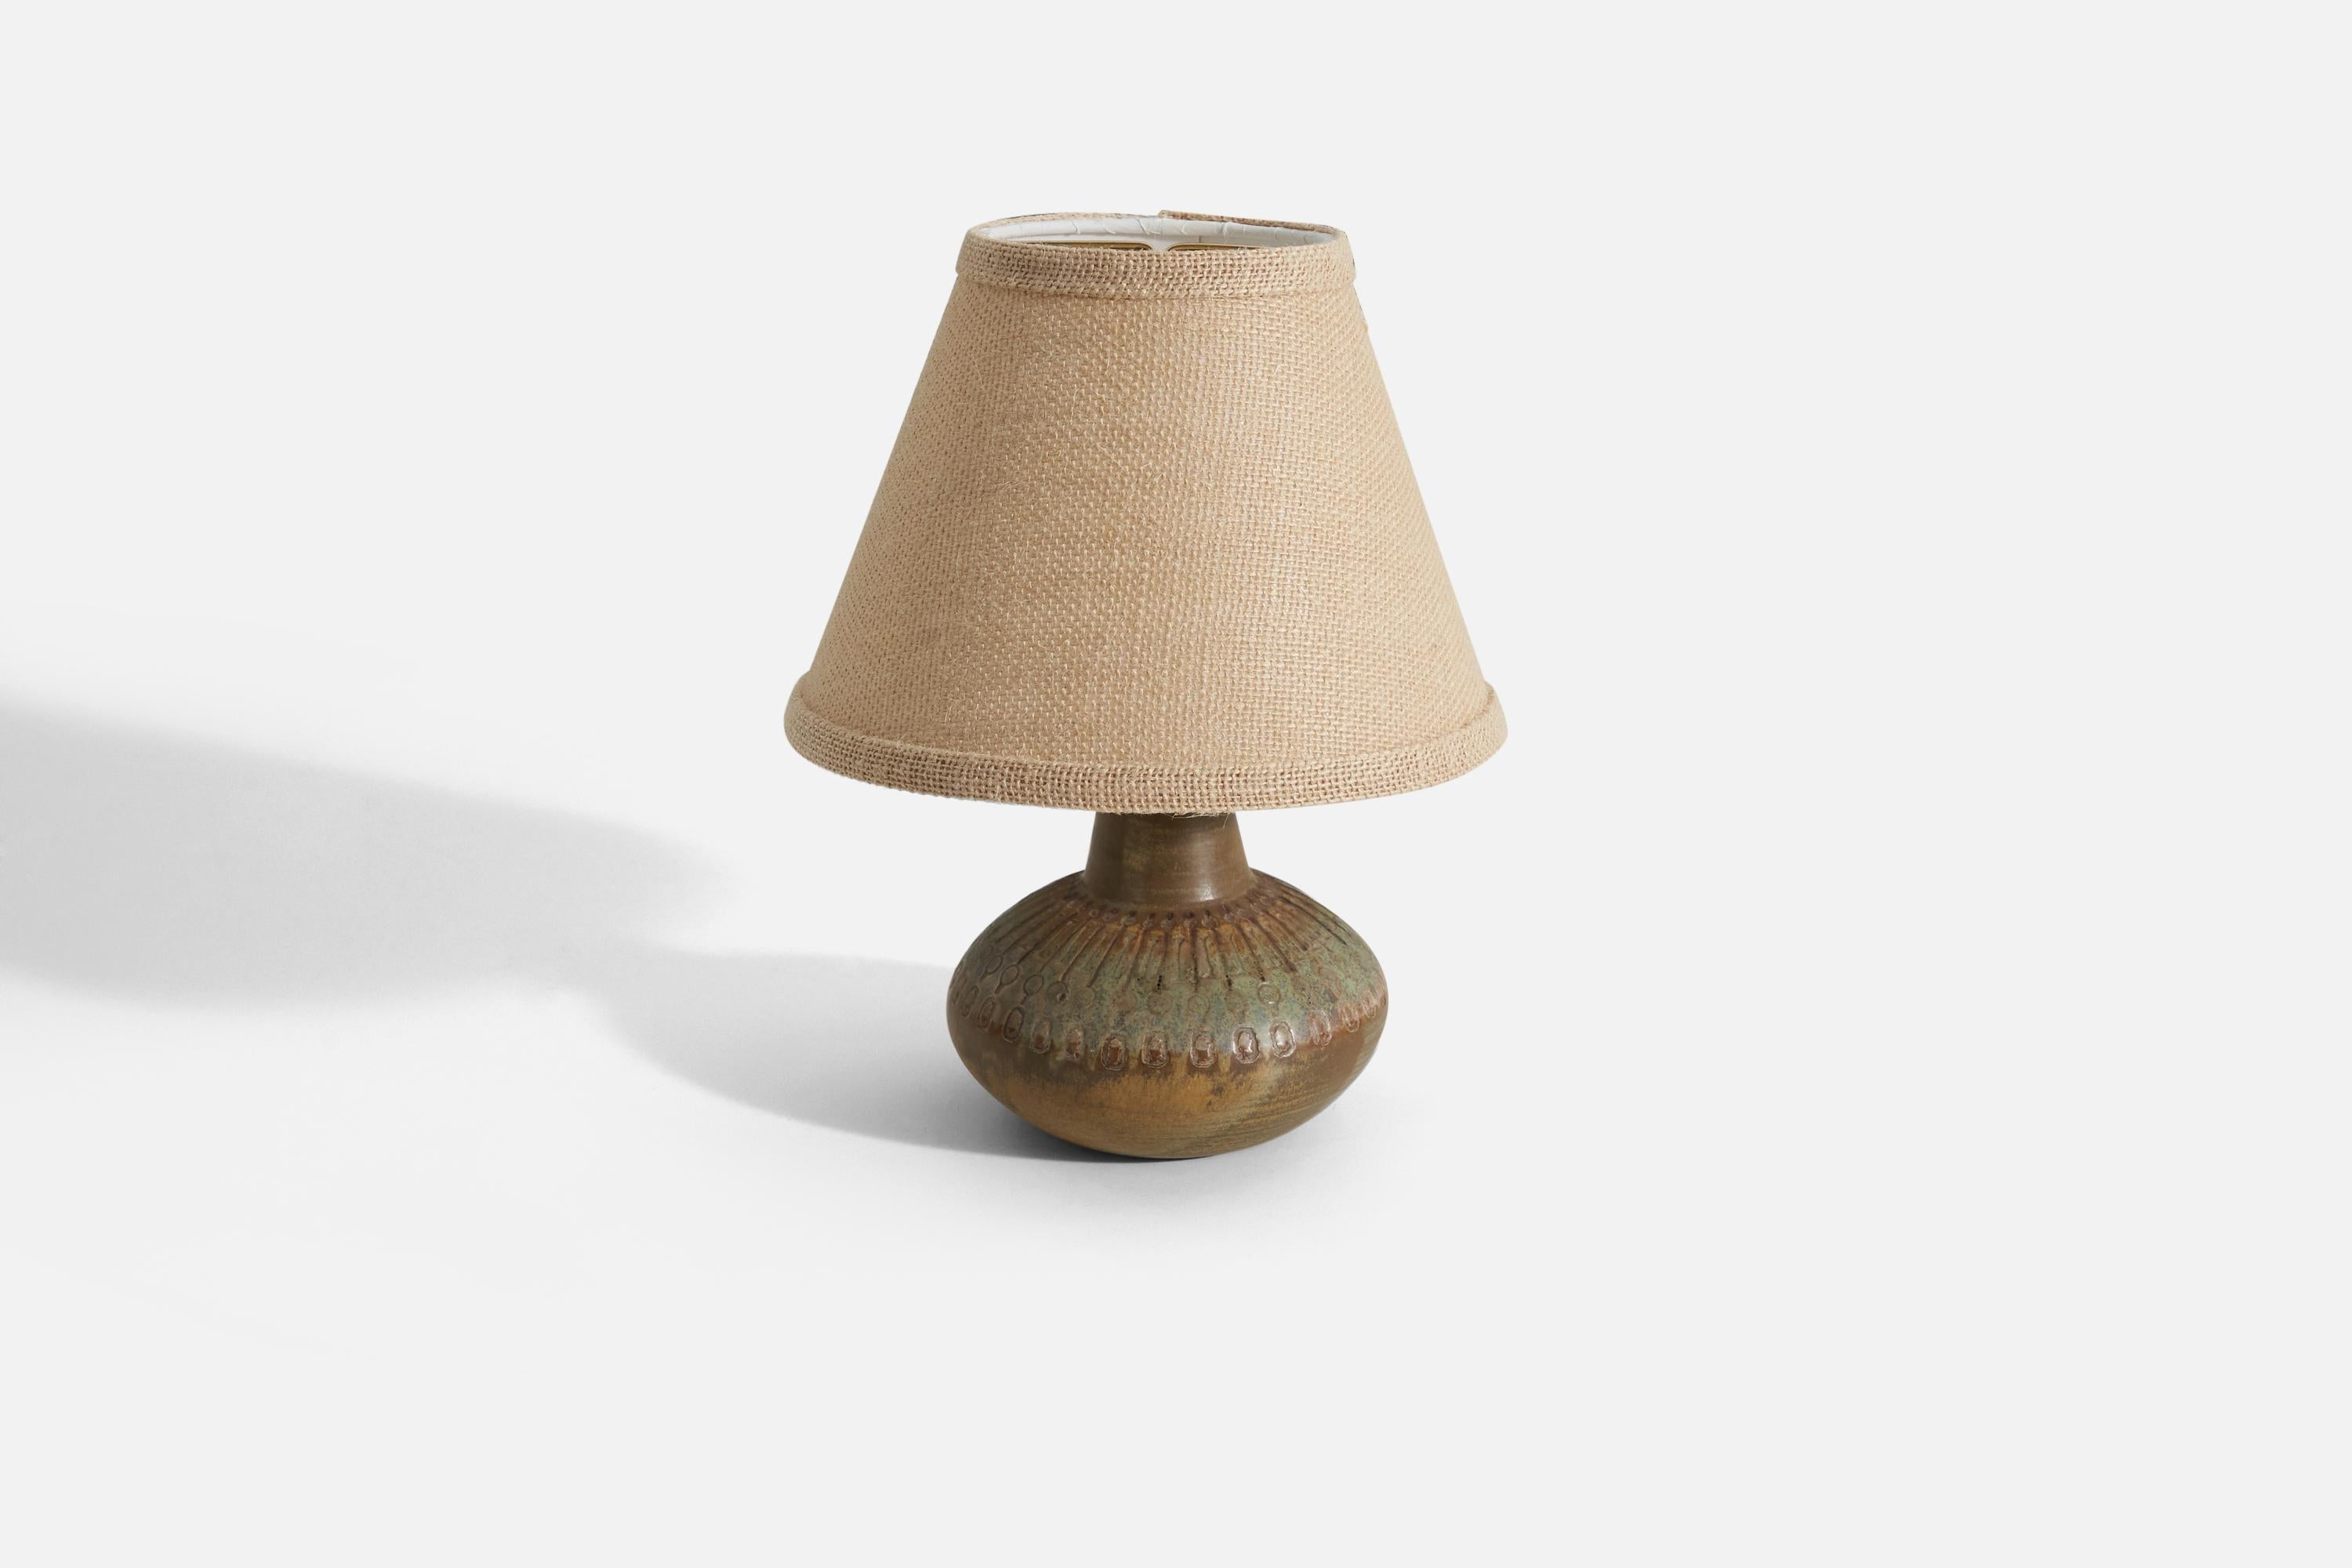 Ulla Winbladh, Table Lamp, Glazed Incised Stoneware, Sweden, 1950s In Good Condition For Sale In High Point, NC